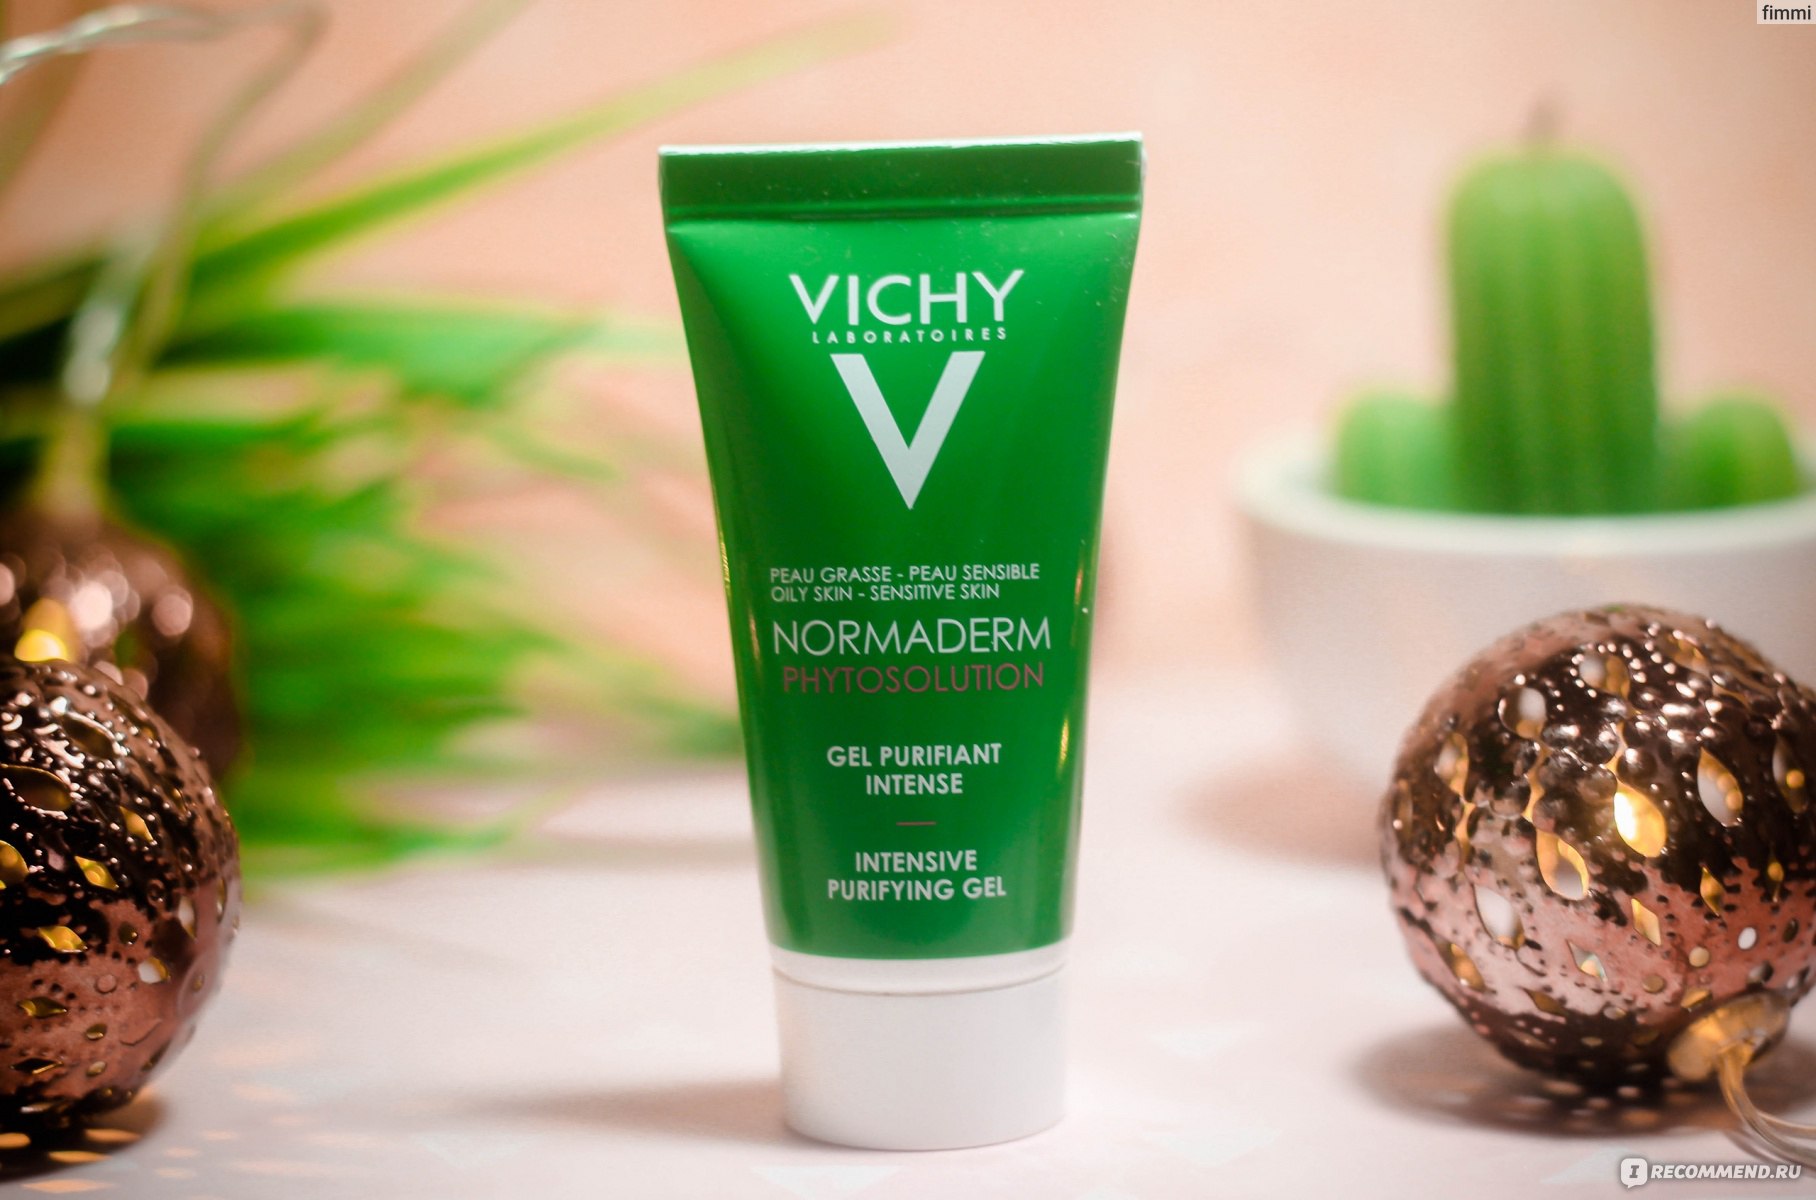 Normaderm gel purifiant intense. Виши умывалка Normaderm. Vichy Normaderm phytosolution. Vichy Normaderm phytosolution Gel. Vichy Normaderm phytosolution крем.